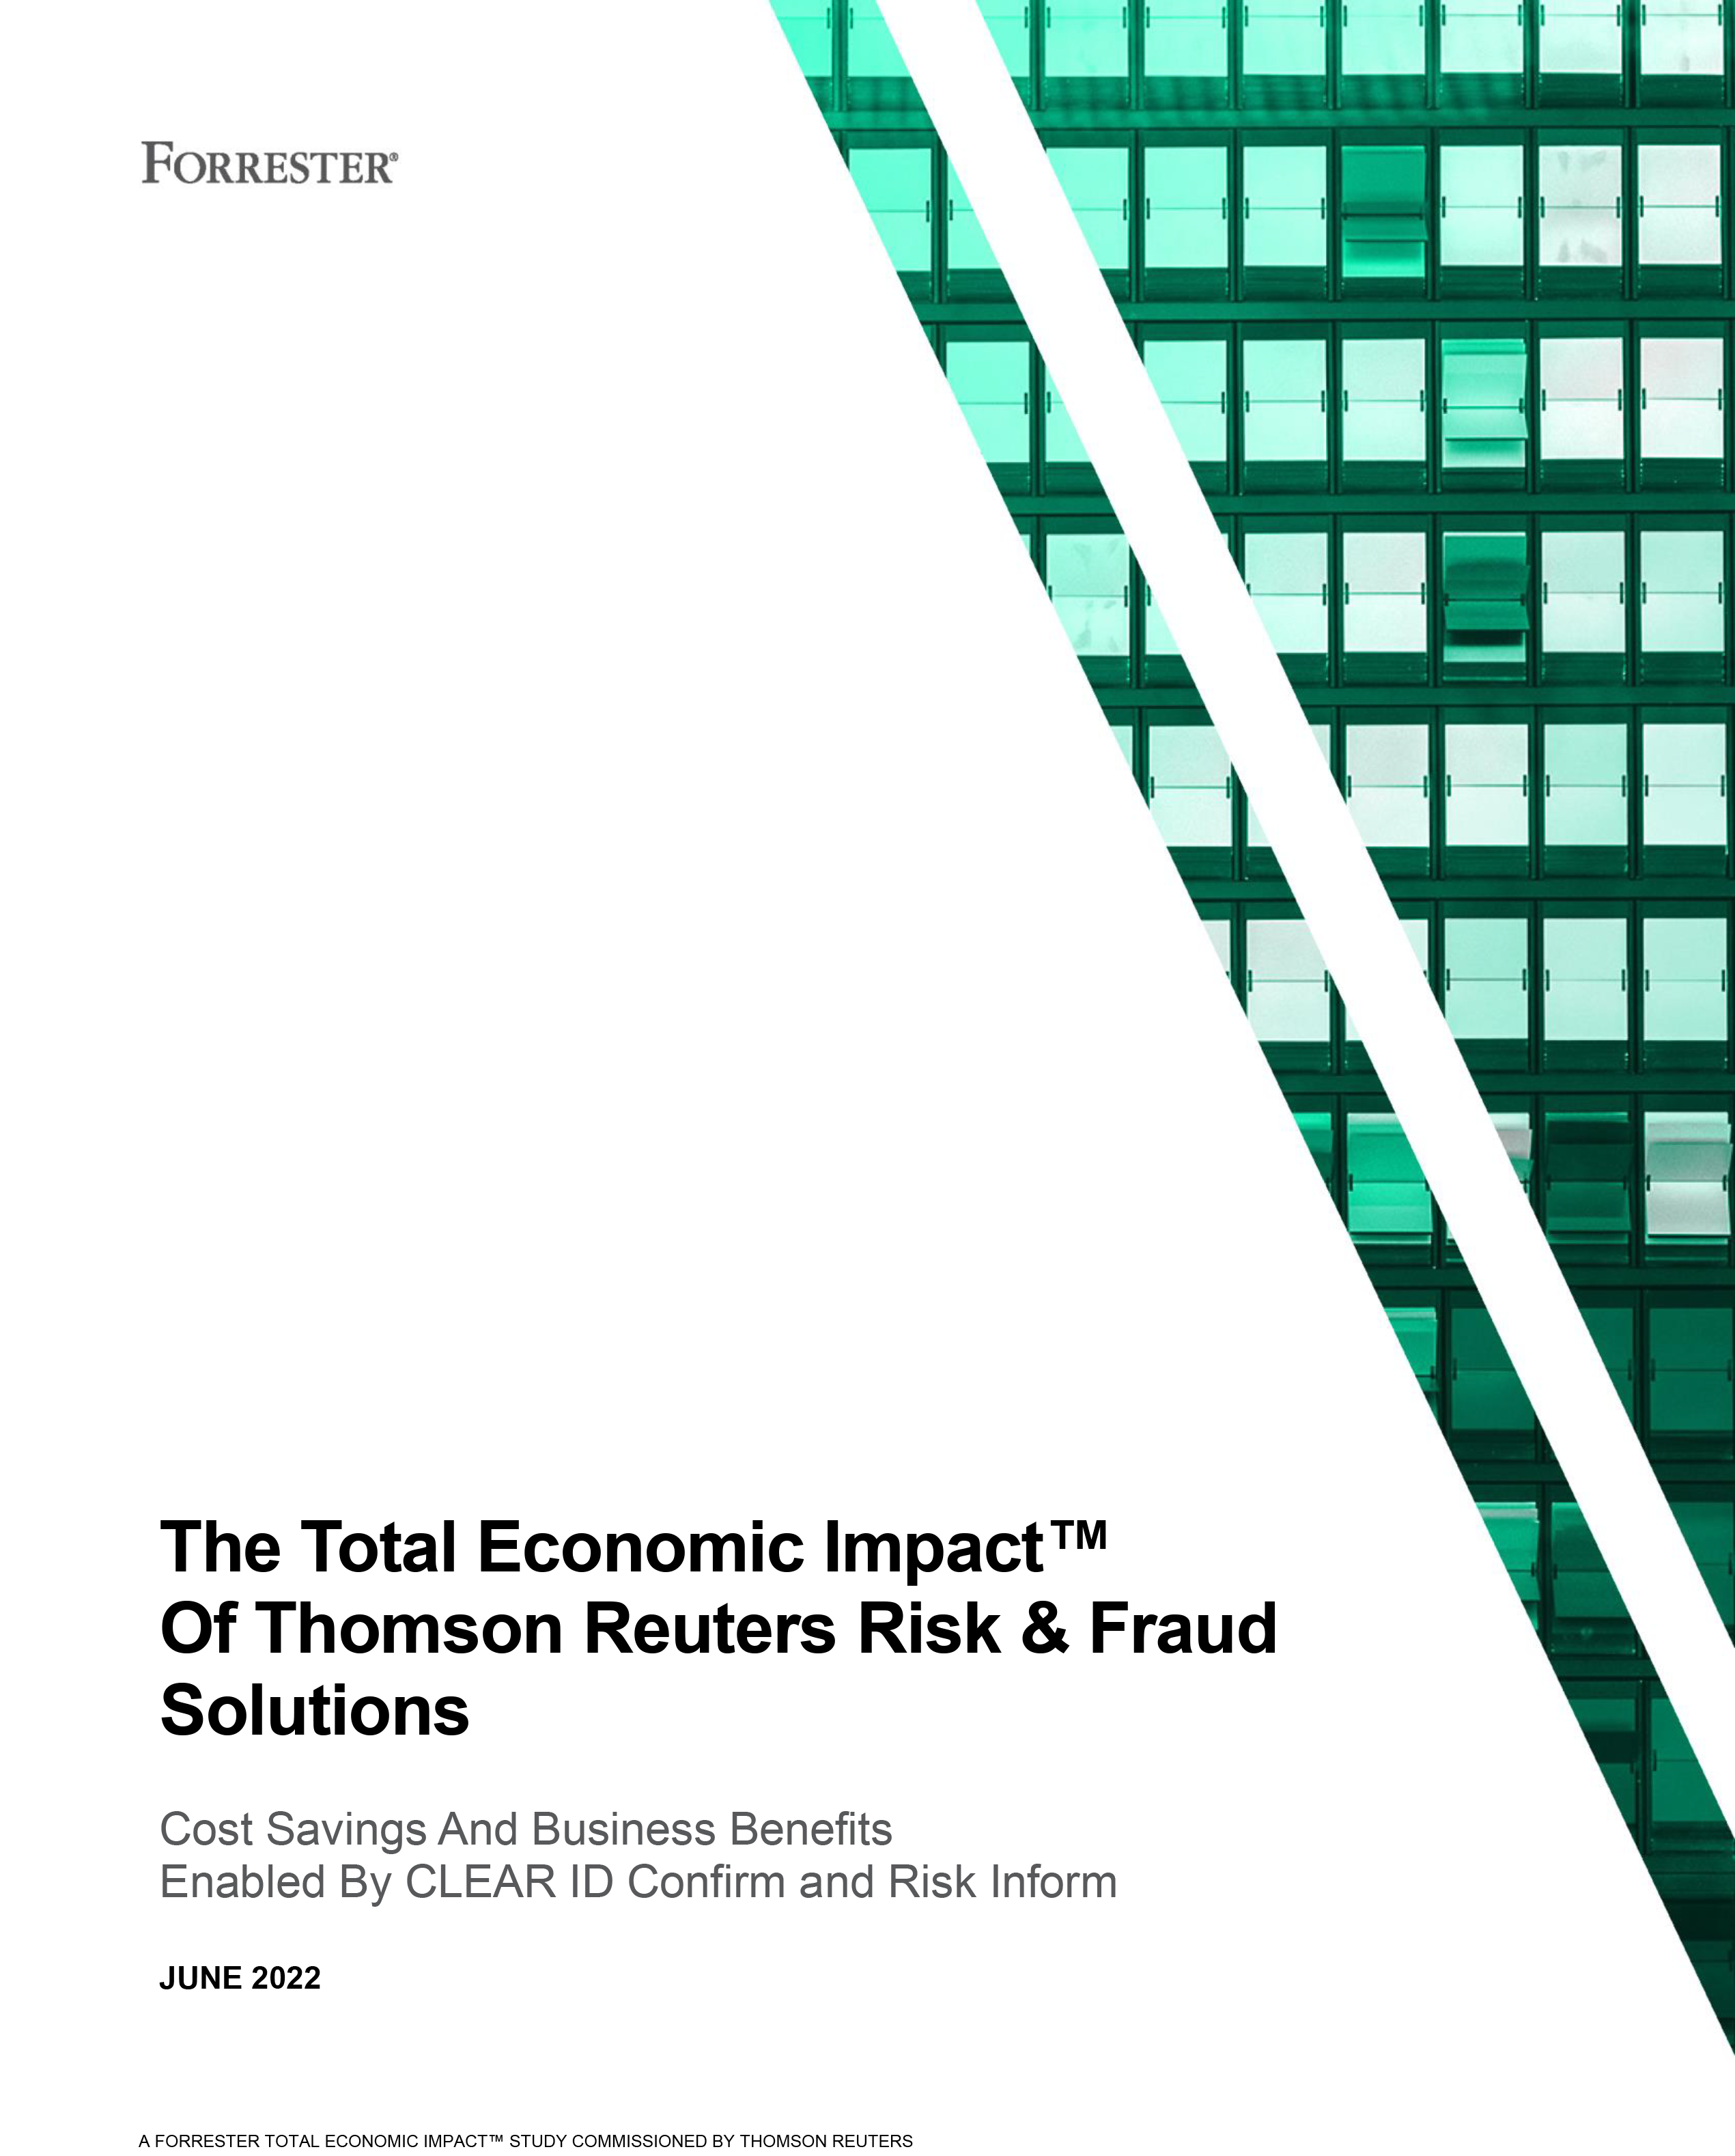 The Total Economic Impact™ Of Thomson Reuters Risk & Fraud Solutions